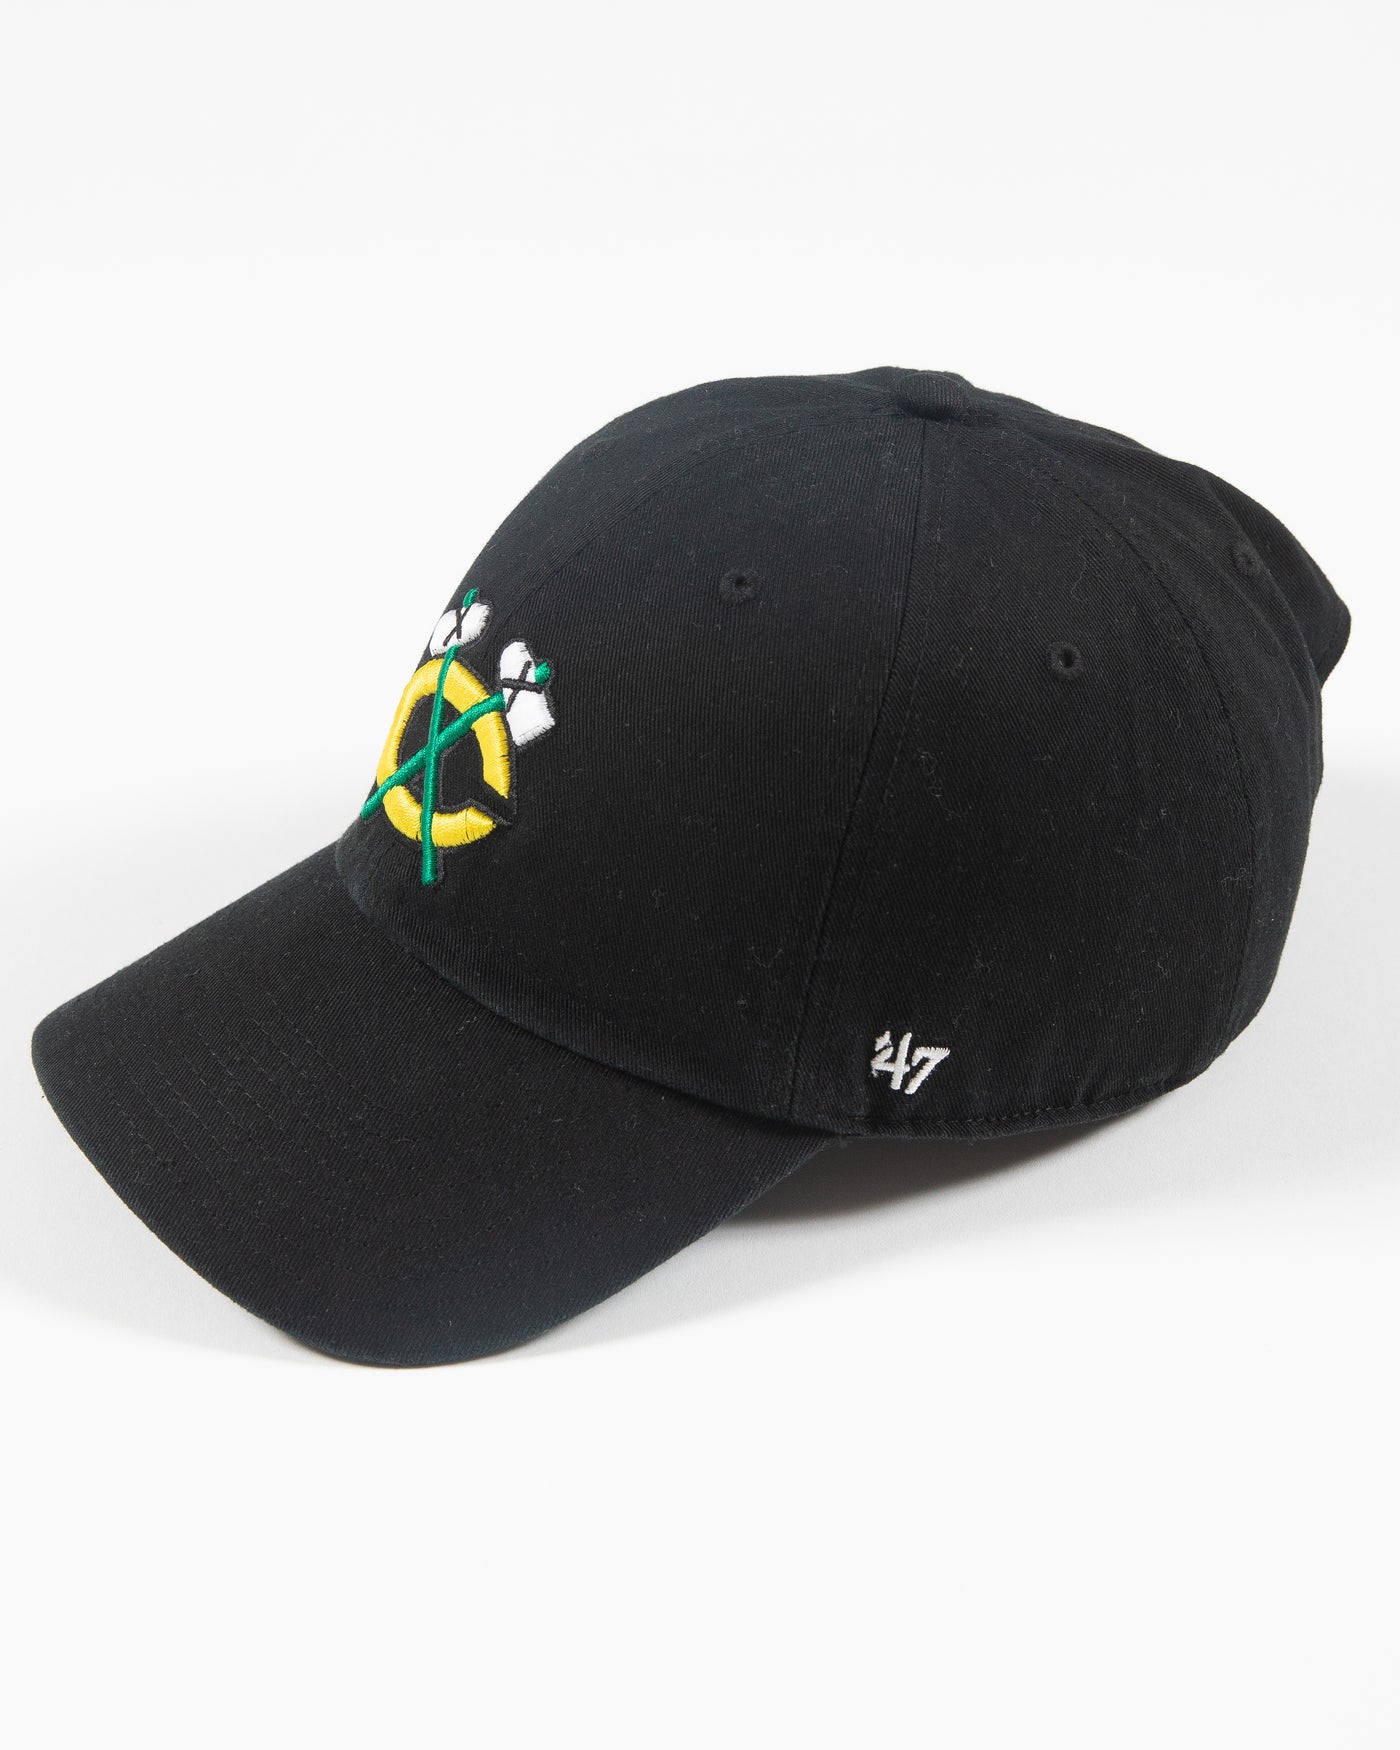 '47 brand black cap with Chicago Blackhawks secondary logo embroidered on front - left side lay flat